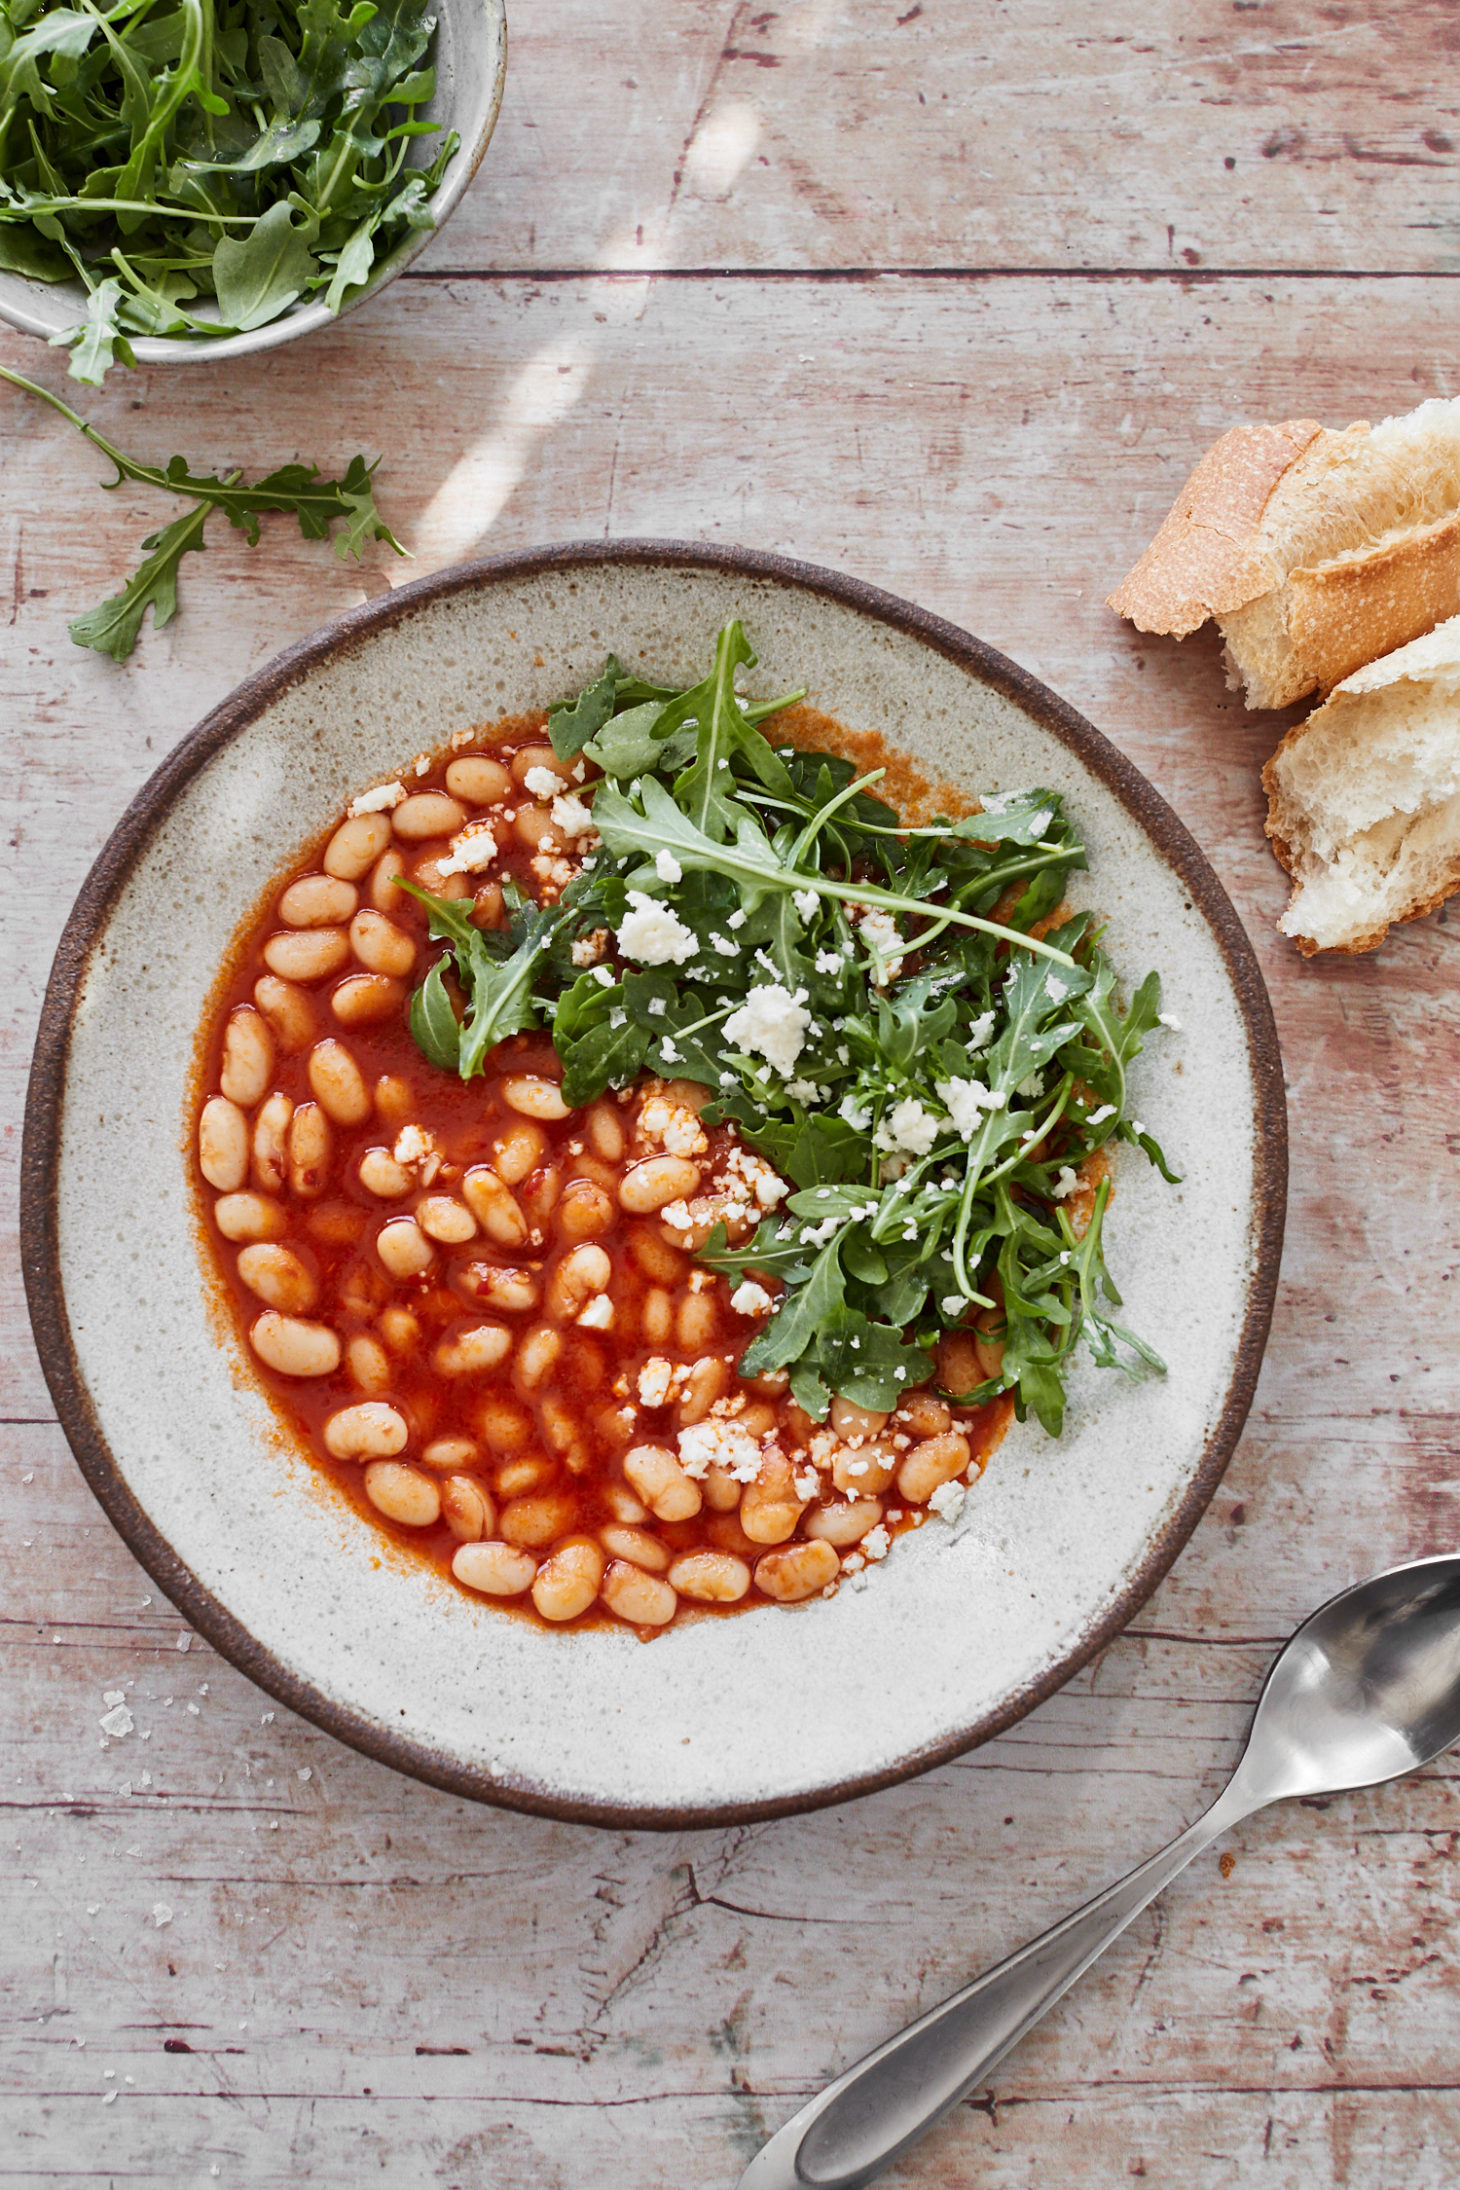 Light image with a bowl of tomato bean stew with arugula on top on a white background.